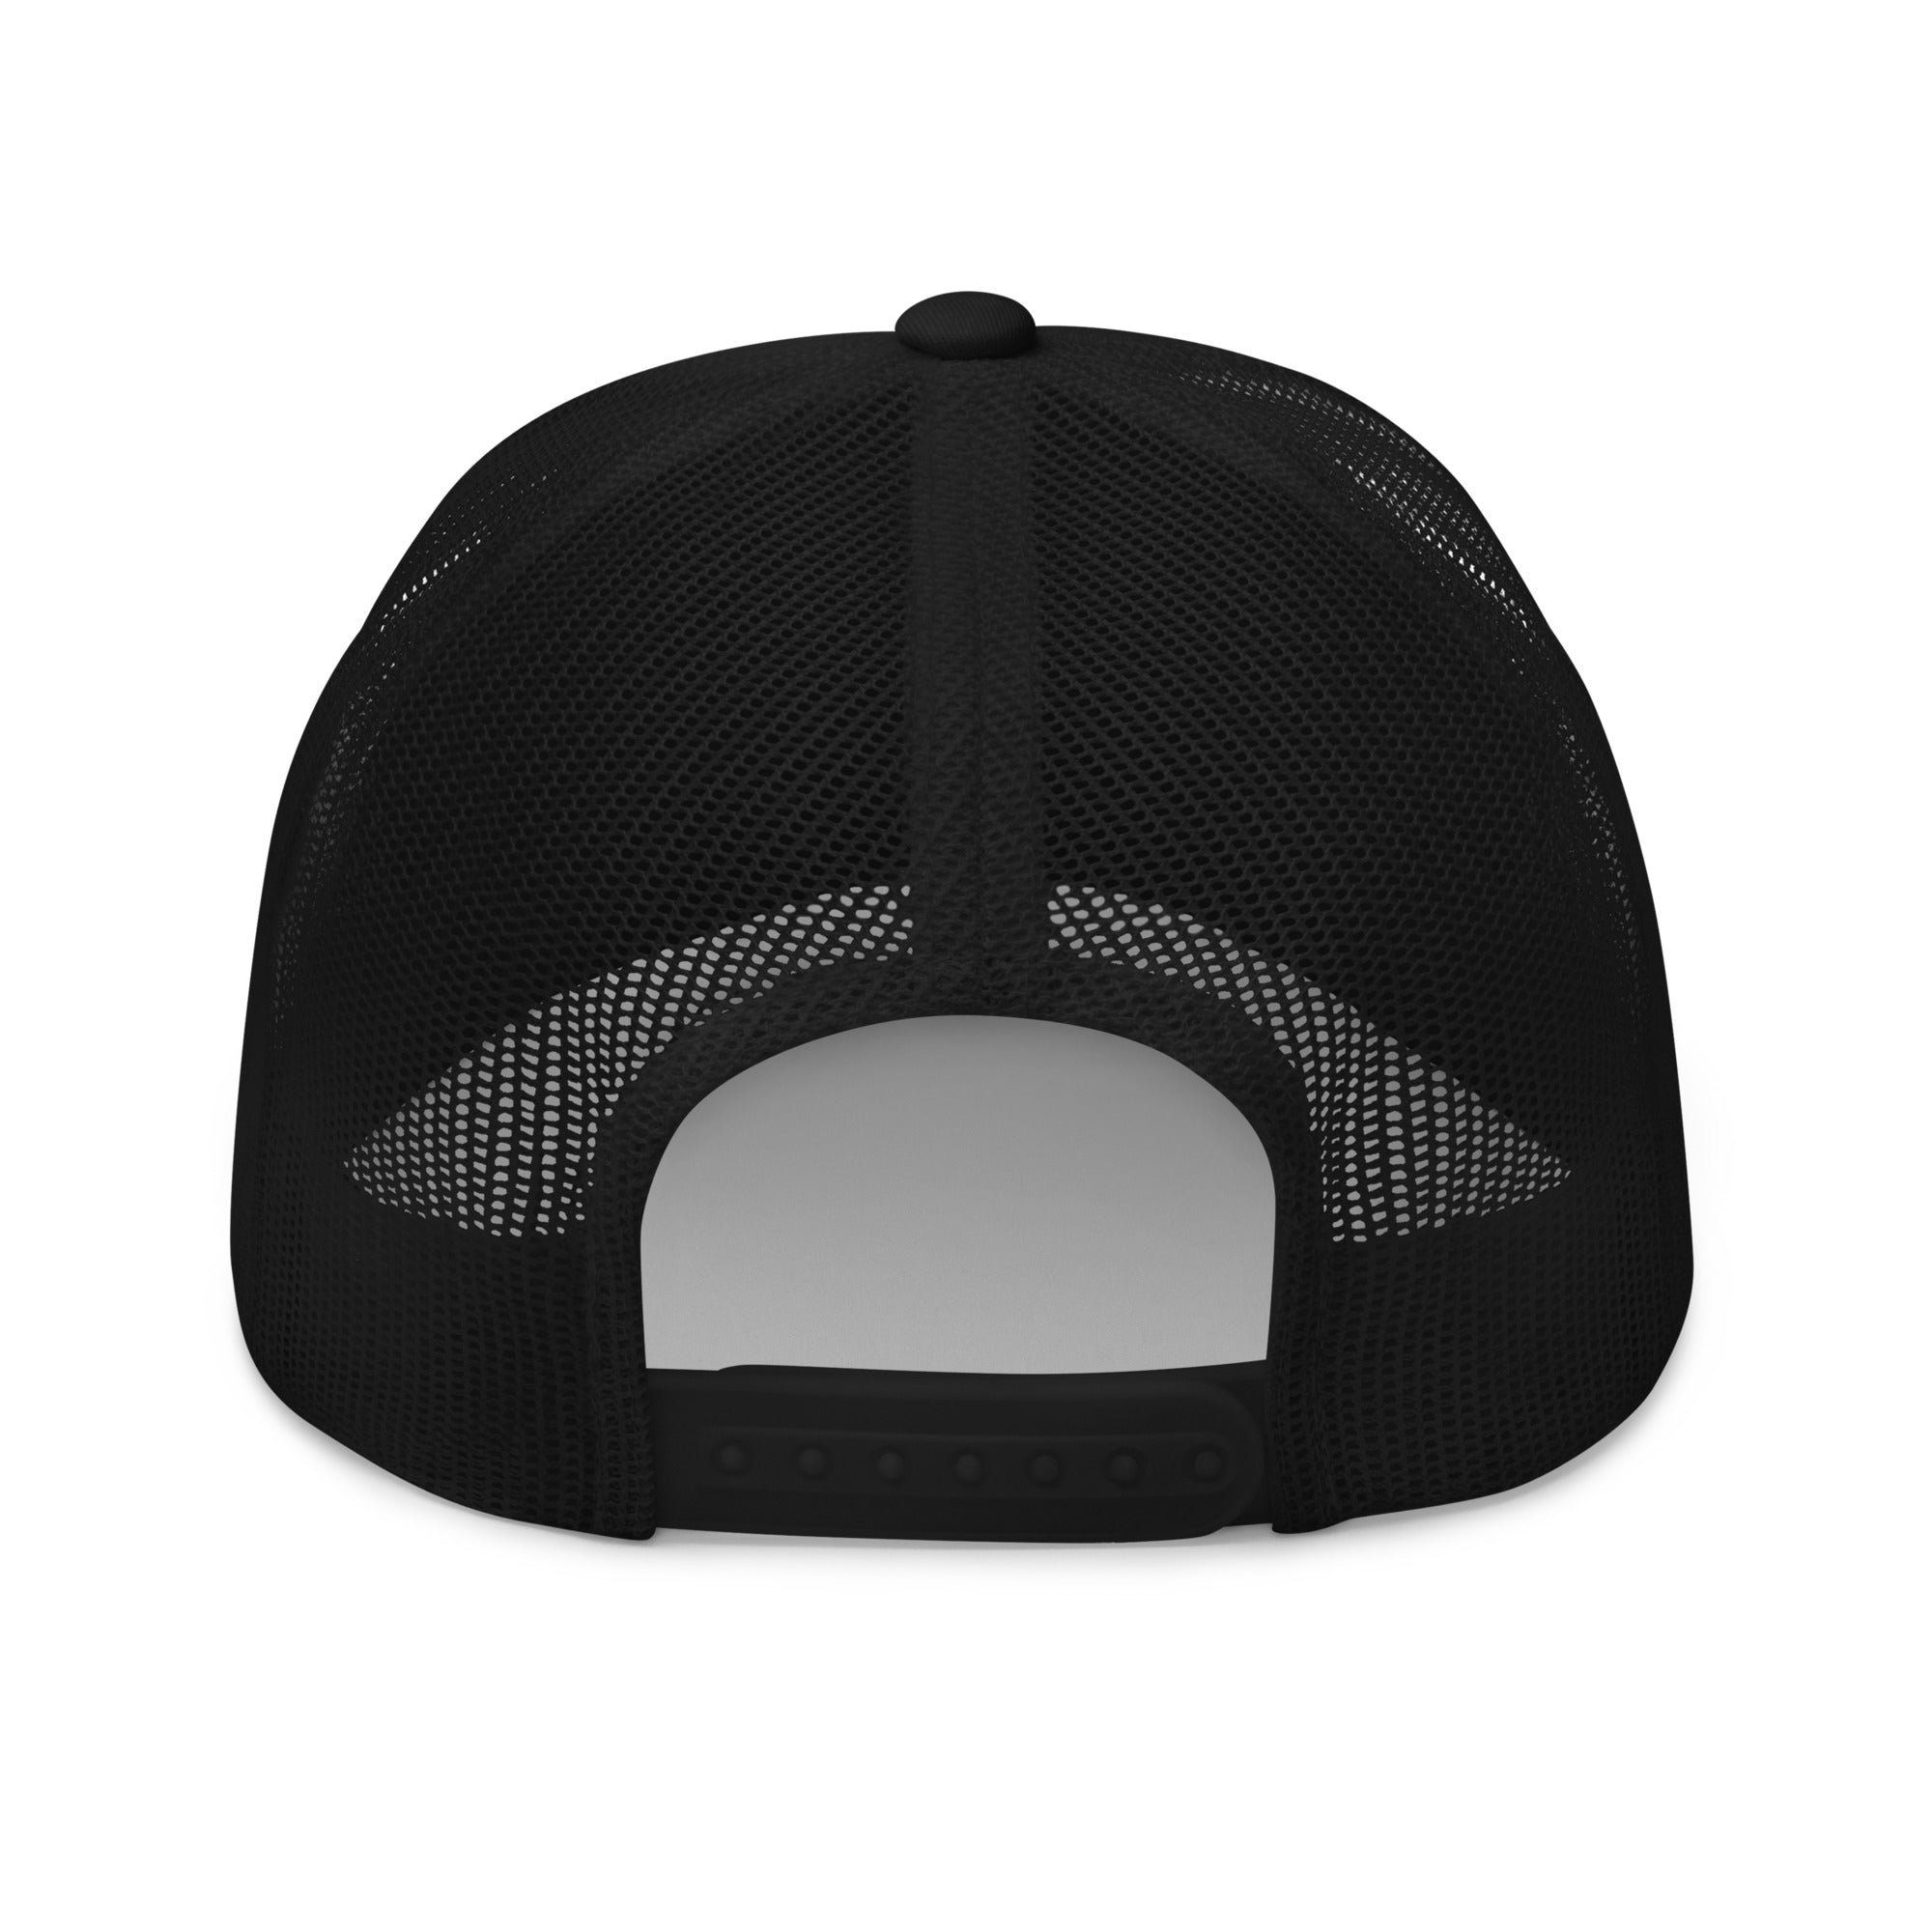 Bitcoin Headwear - The Bitcoin Gothic Trucker Hat has mesh back panels and a snapback closure. Back view.